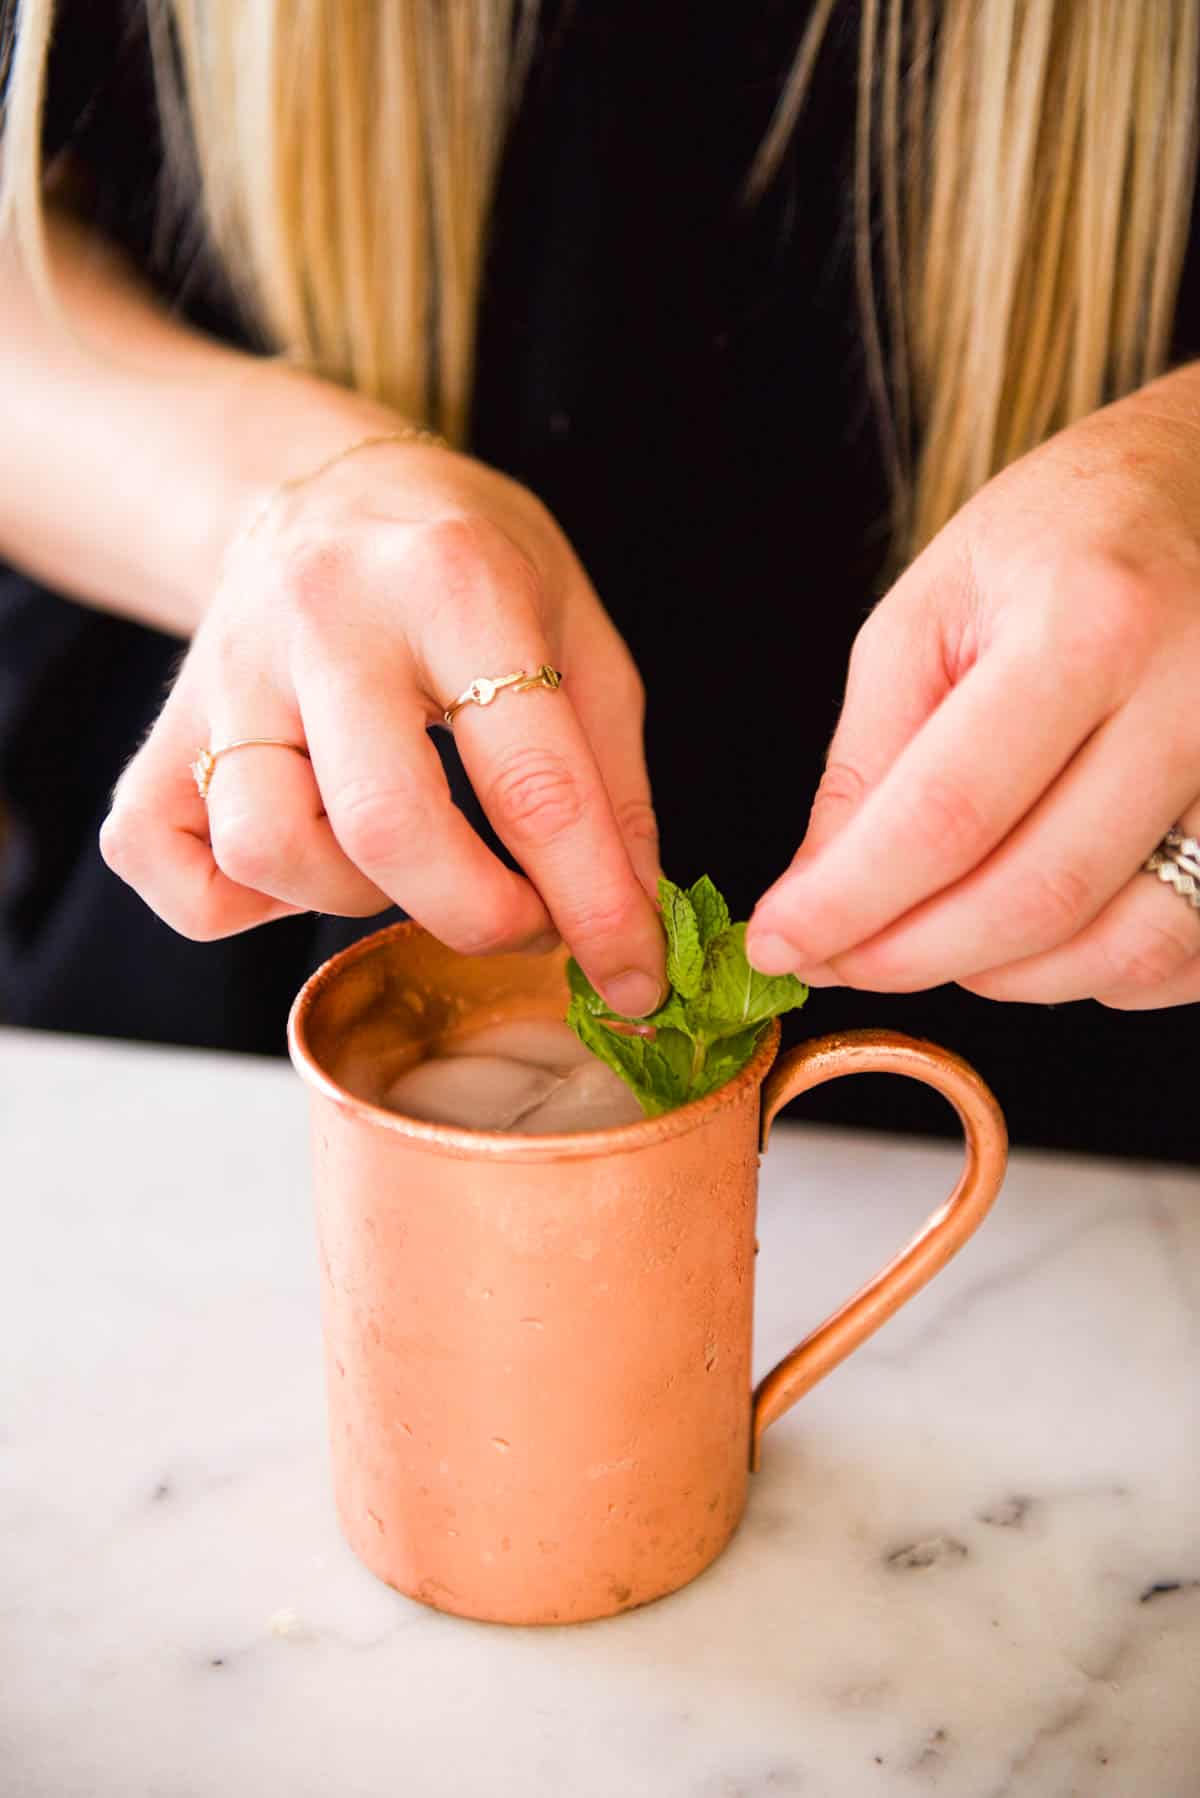 Adding fresh mint to a cocktail as a garnish.